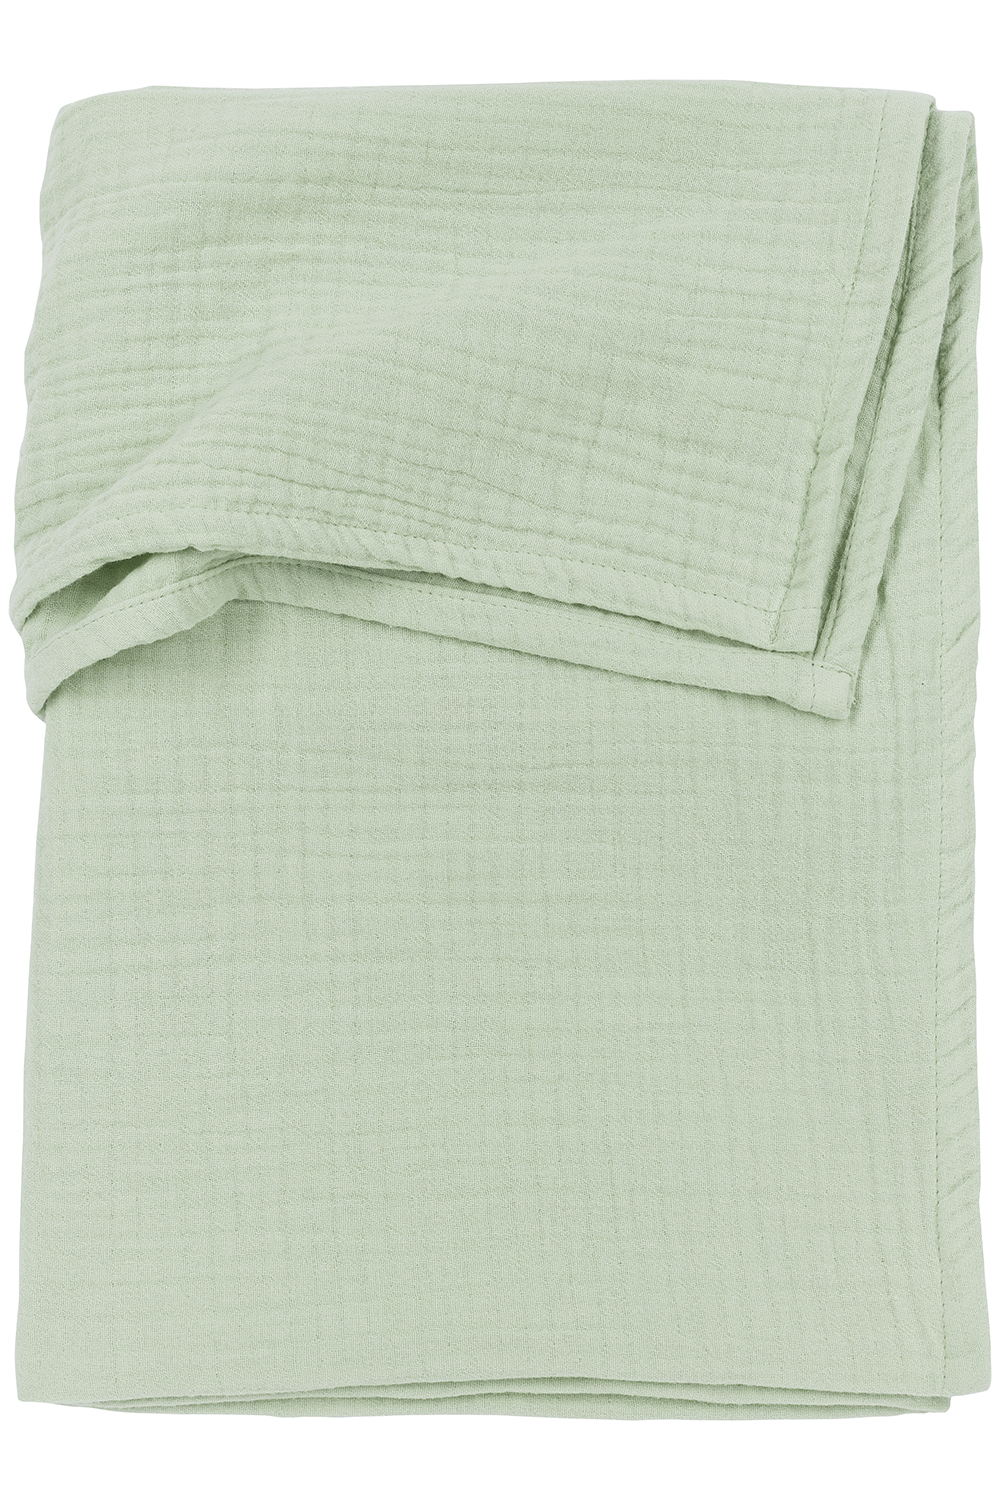 Cot bed sheet pre-washed muslin Uni - soft green - 100x150cm